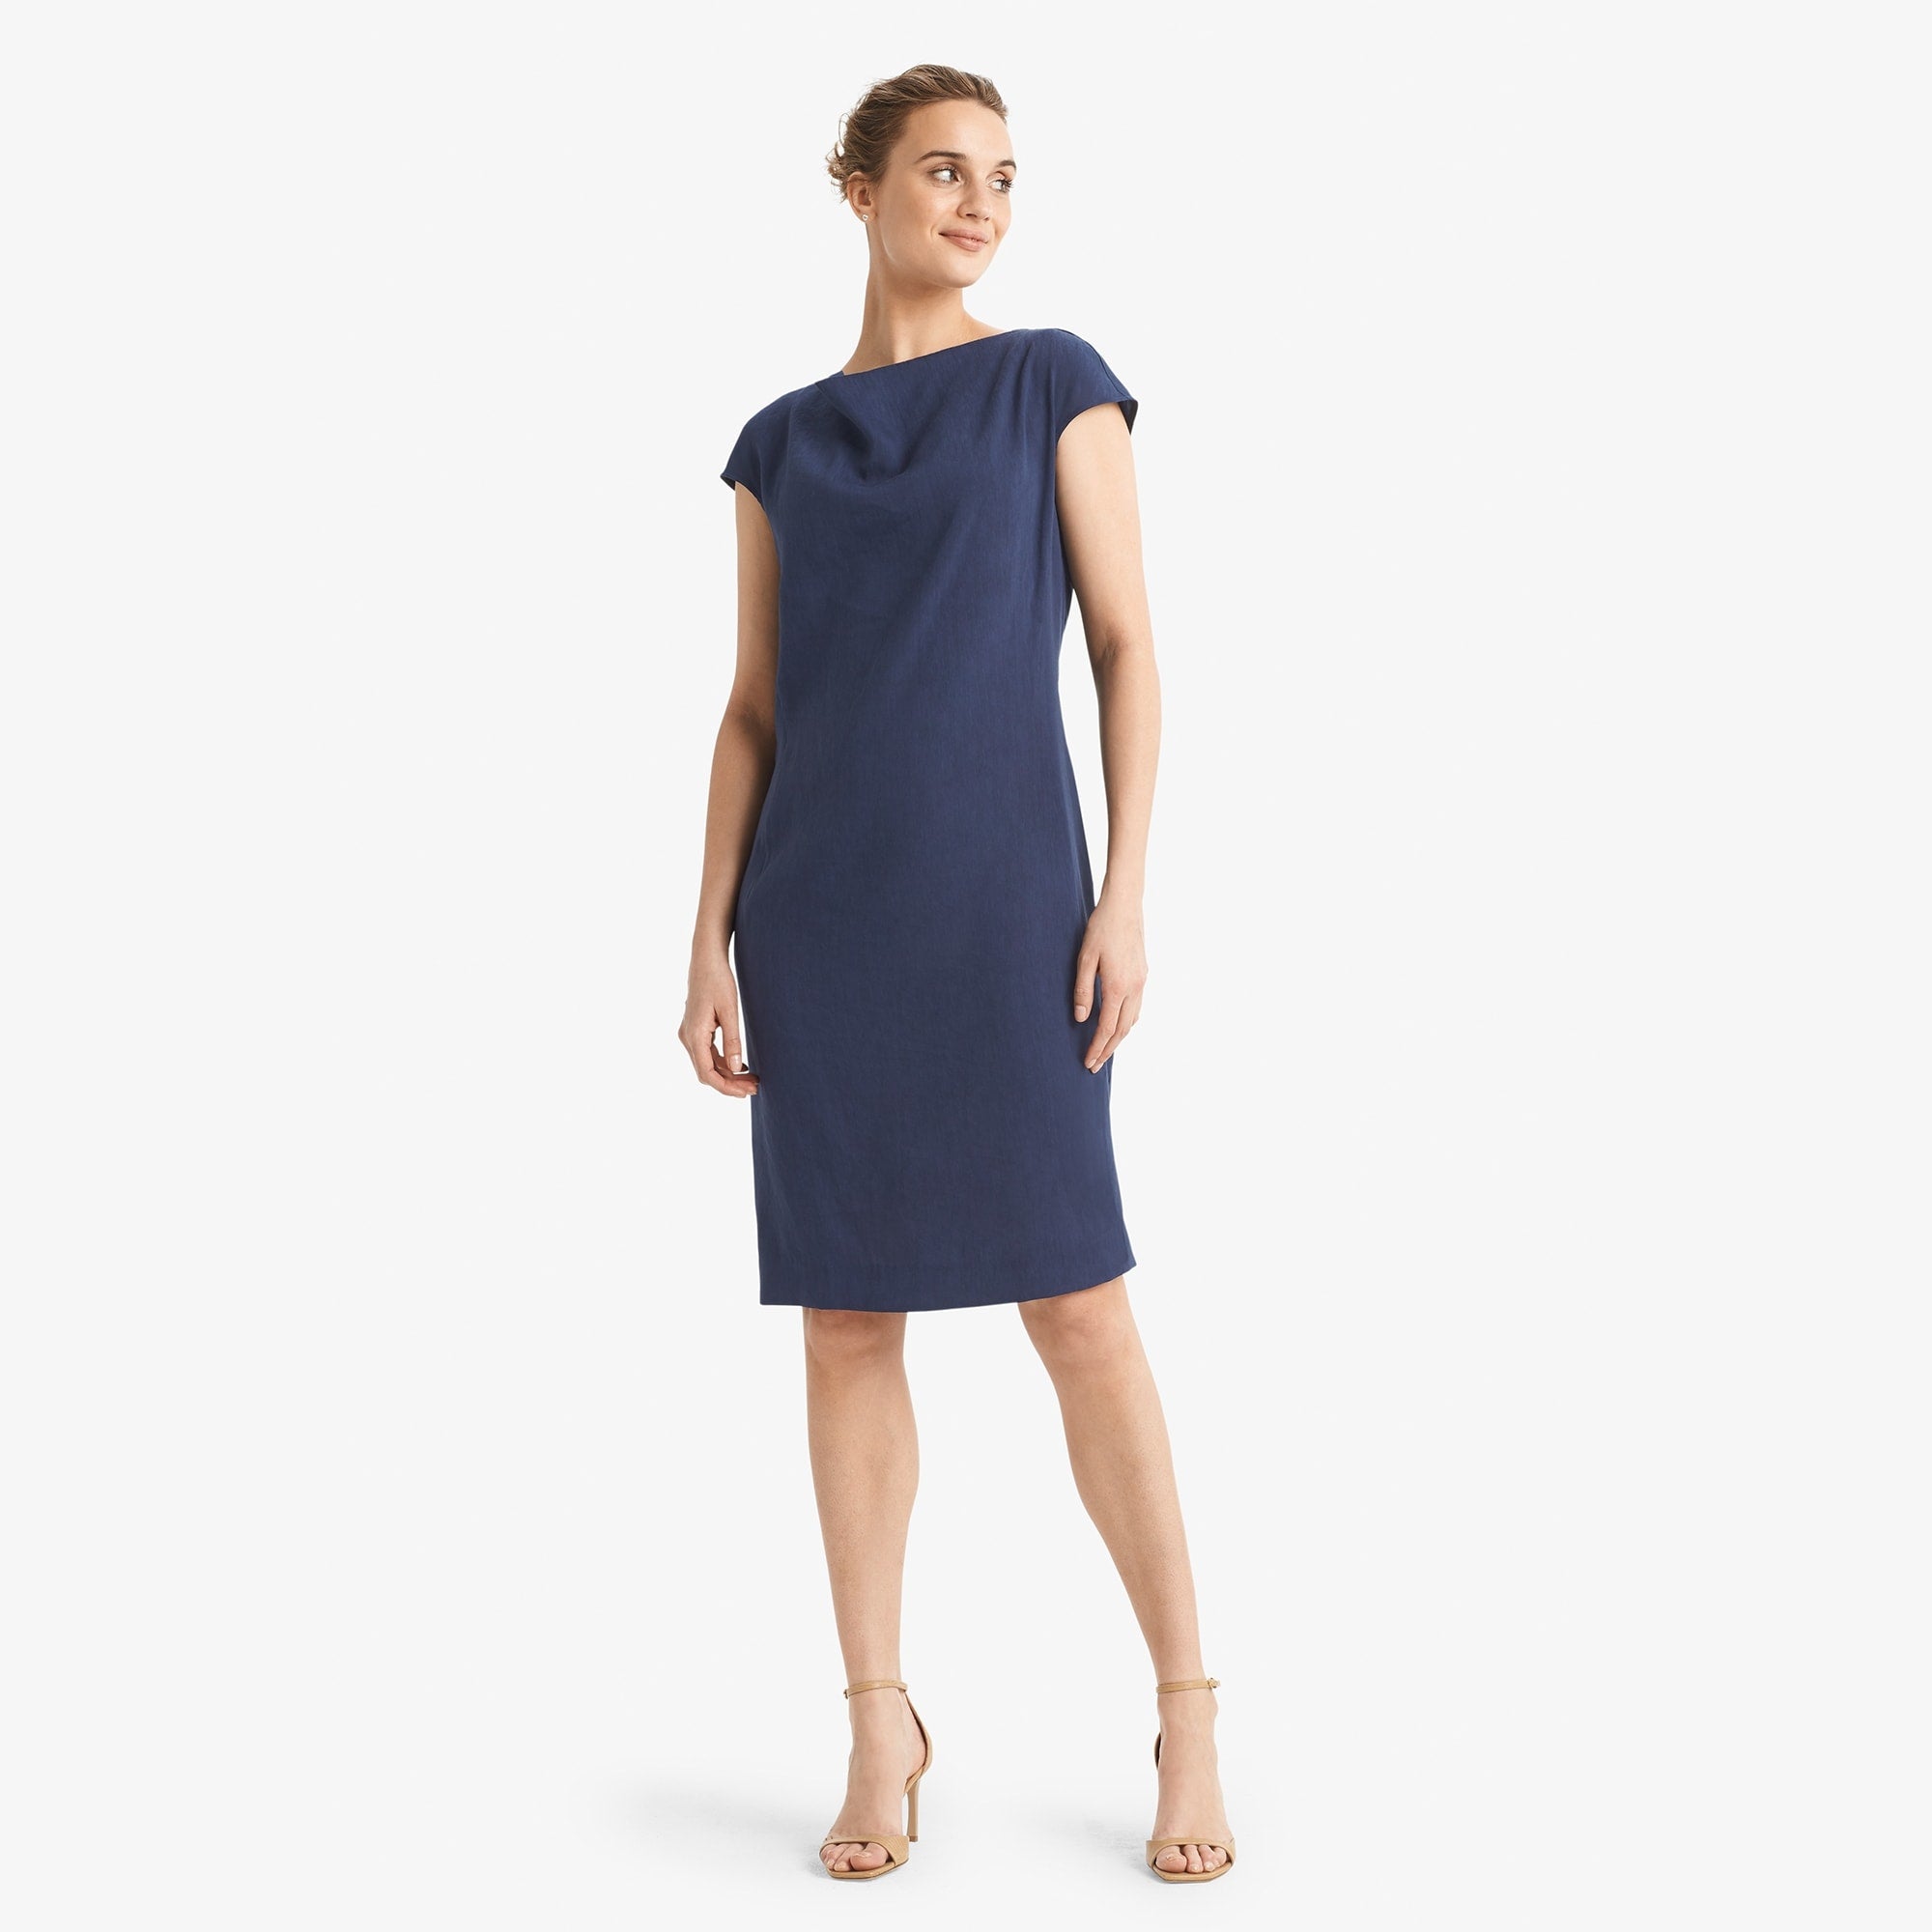 Front image of a woman standing wearing the Marilyn dress stretch linen in blueberry 